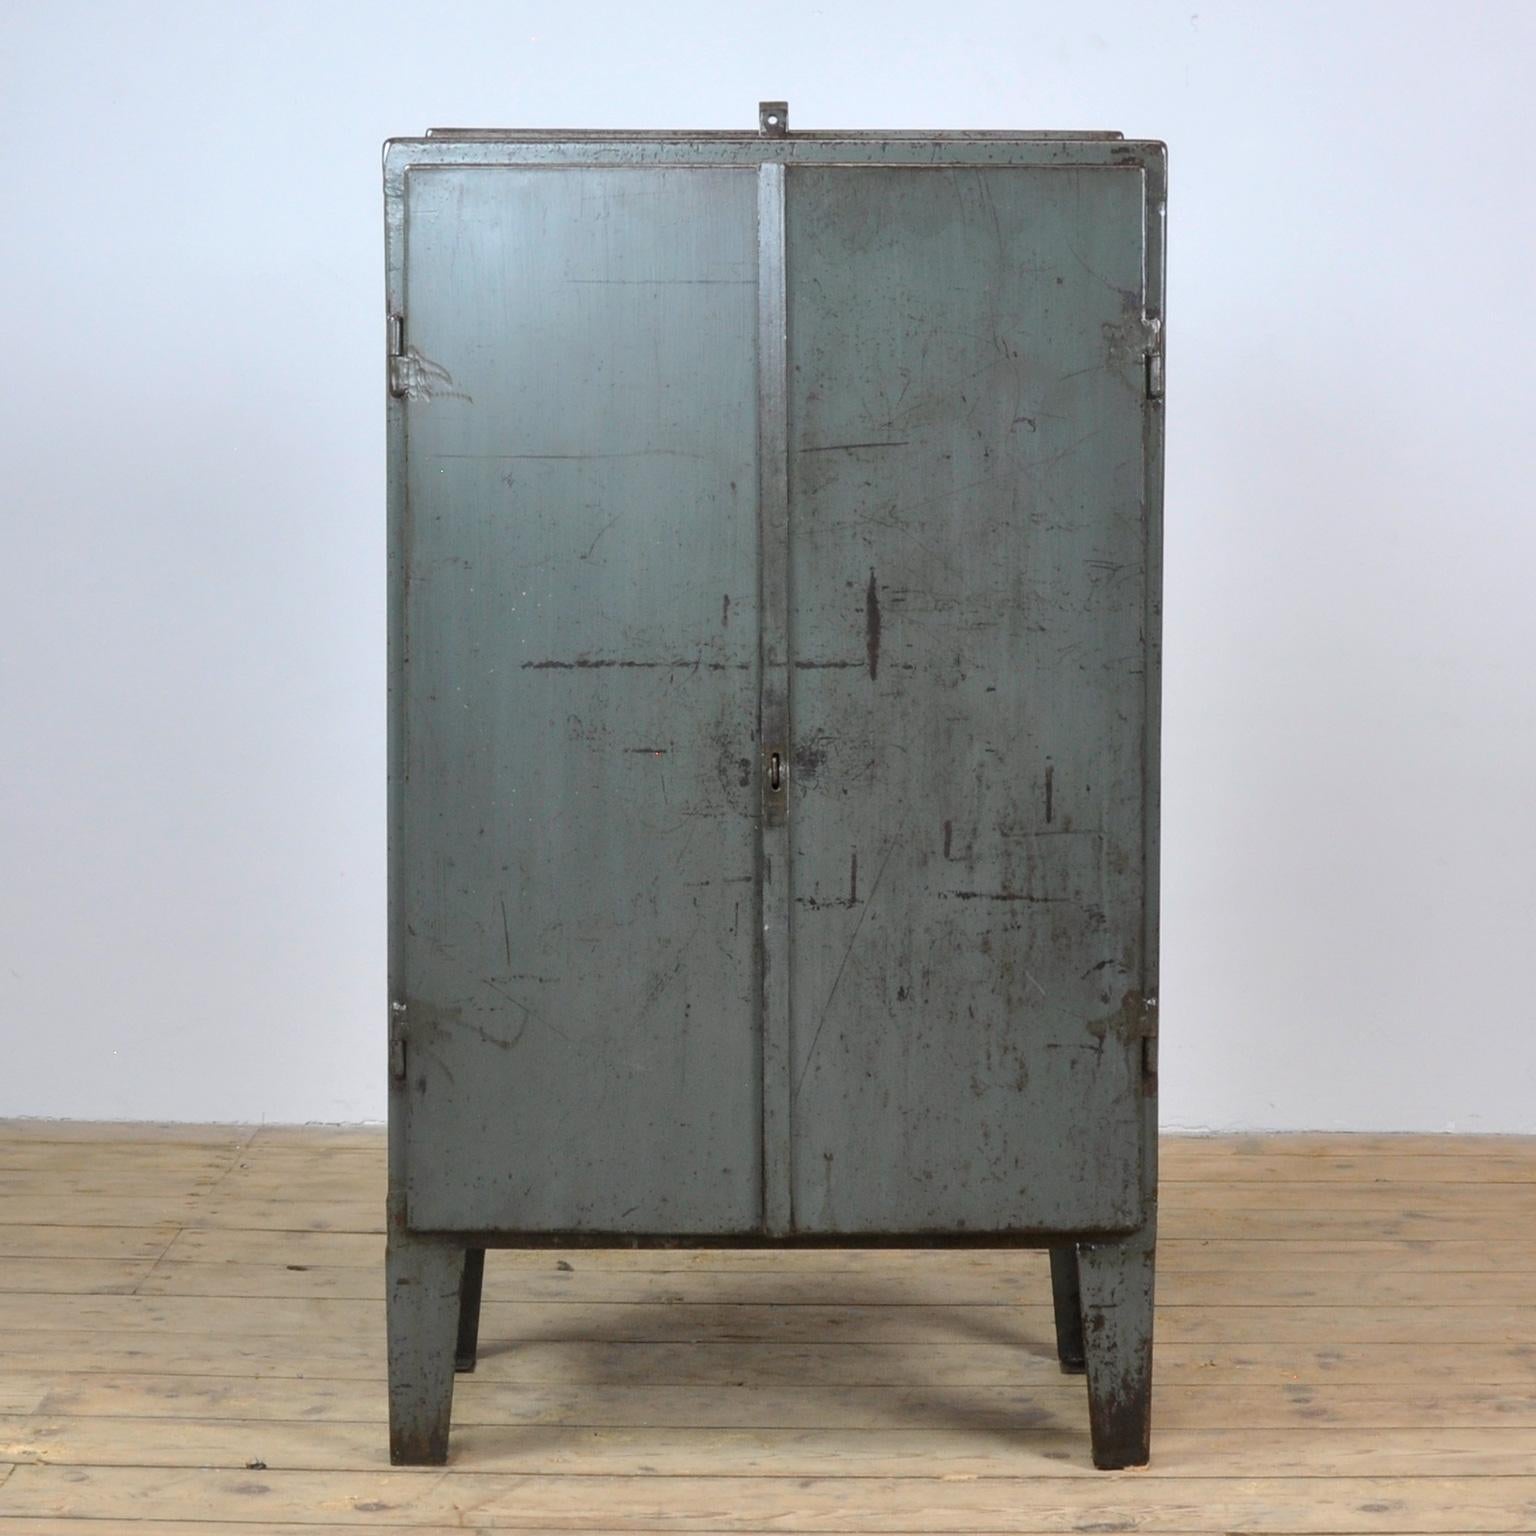 Iron industrial sideboard in good condition. Made of metal. With on top of a valve. Two shelves and two drawers on the inside. Treated for rust and finished with a transparent varnish.